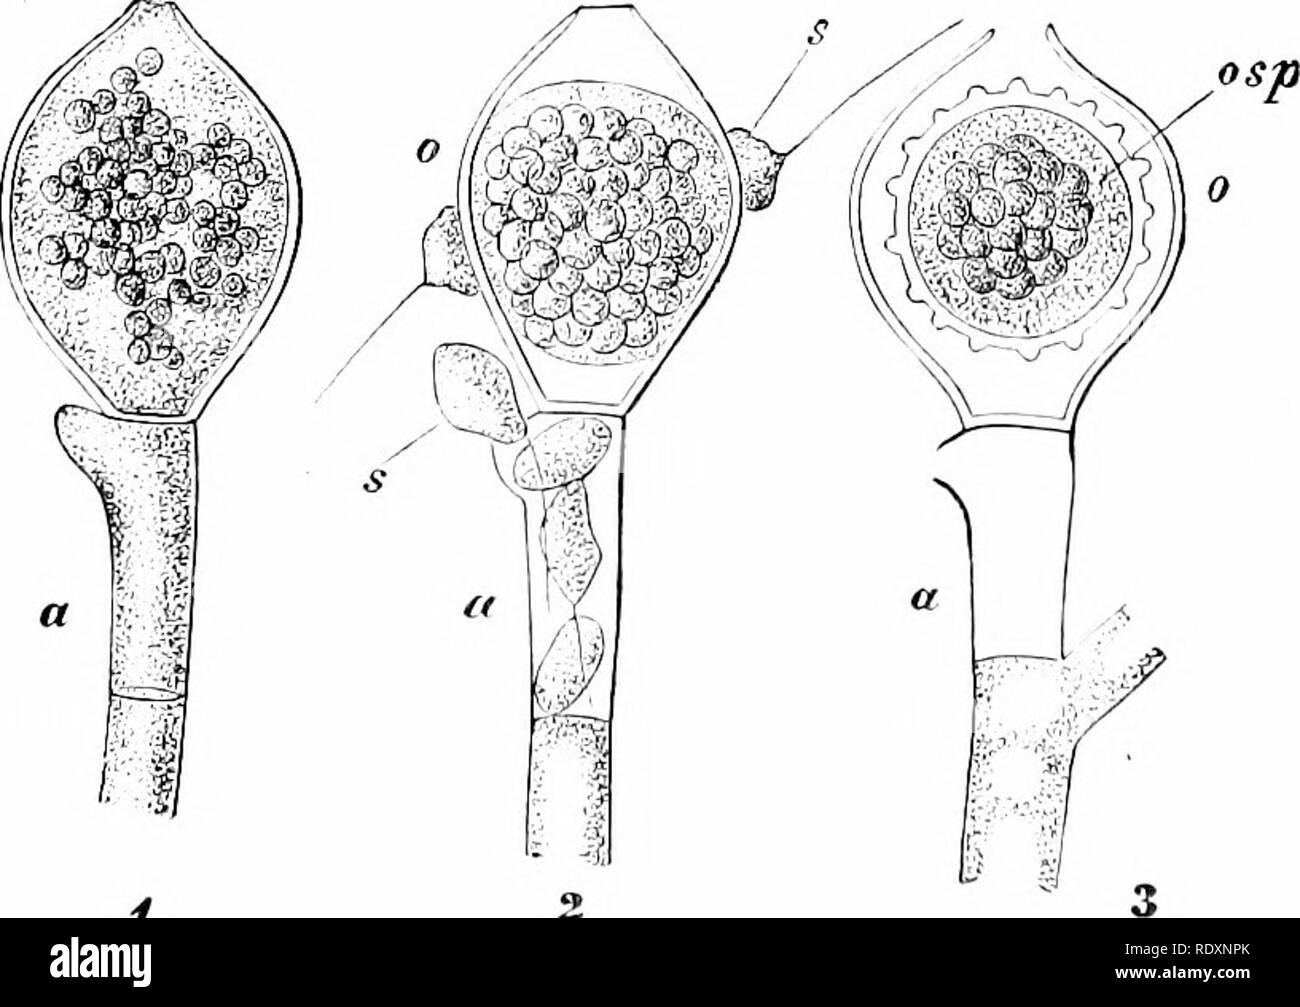 . Botany of the living plant. Botany. Fio. 357. Fertilisation of thie Peronosporeae. I. Peronospora parasitica, young multi- nucleate oogonium {og), and antheridium {an). 2. Albtigo Candida. Oogonium witli the central, uni-nucleate egg {os), and the fertiUsing tube (a) of the antheridium which introduces the male nucleus. 3. The same. The fertilised egg (0) surrounded by periplasm ip). (After Wager, x 6G6.) {From Strasburger.) such an antheridium as is seen in Vaitcheria into the polHnodium of the Peronosporeae, is acomparativelyshght one: the latter does not hberate. I'lo. 358. MonobtepJiaris Stock Photo